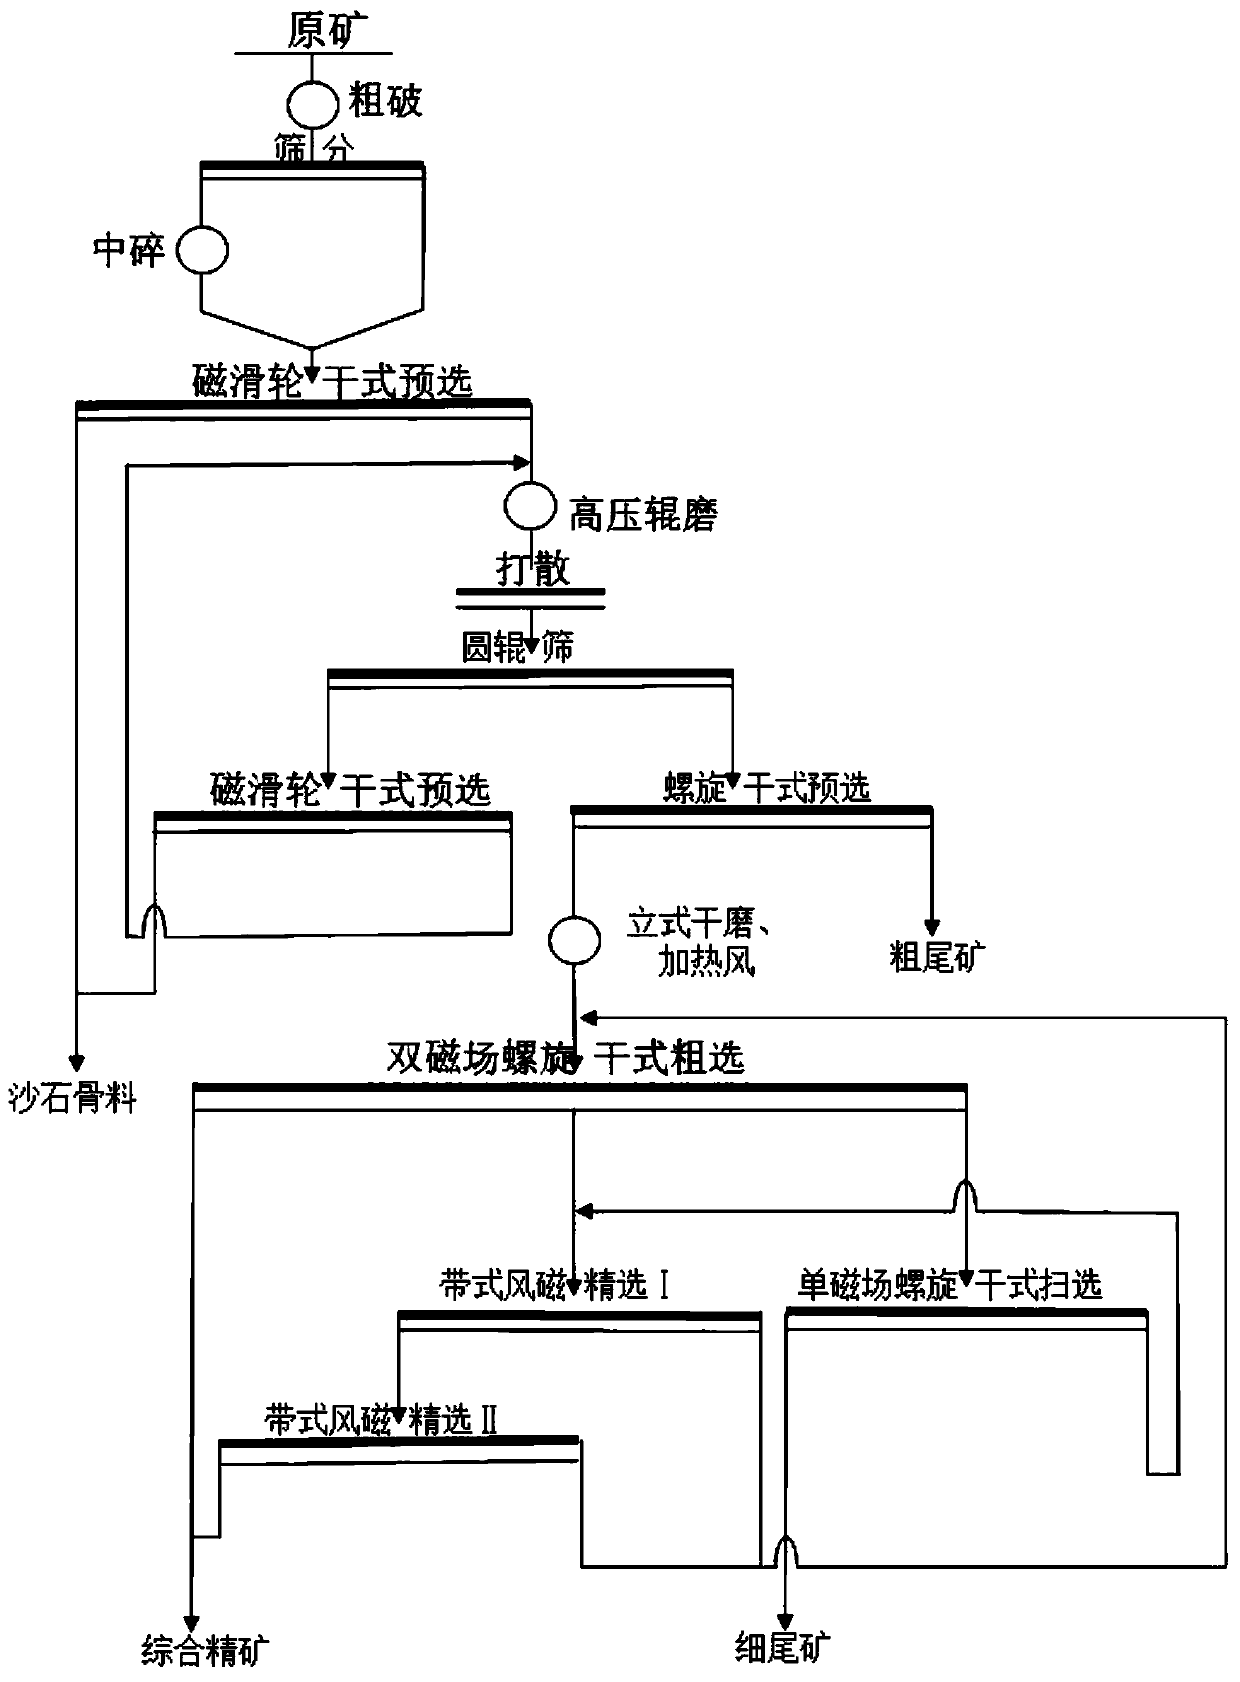 Absolutely-dry type sorting method for iron ores